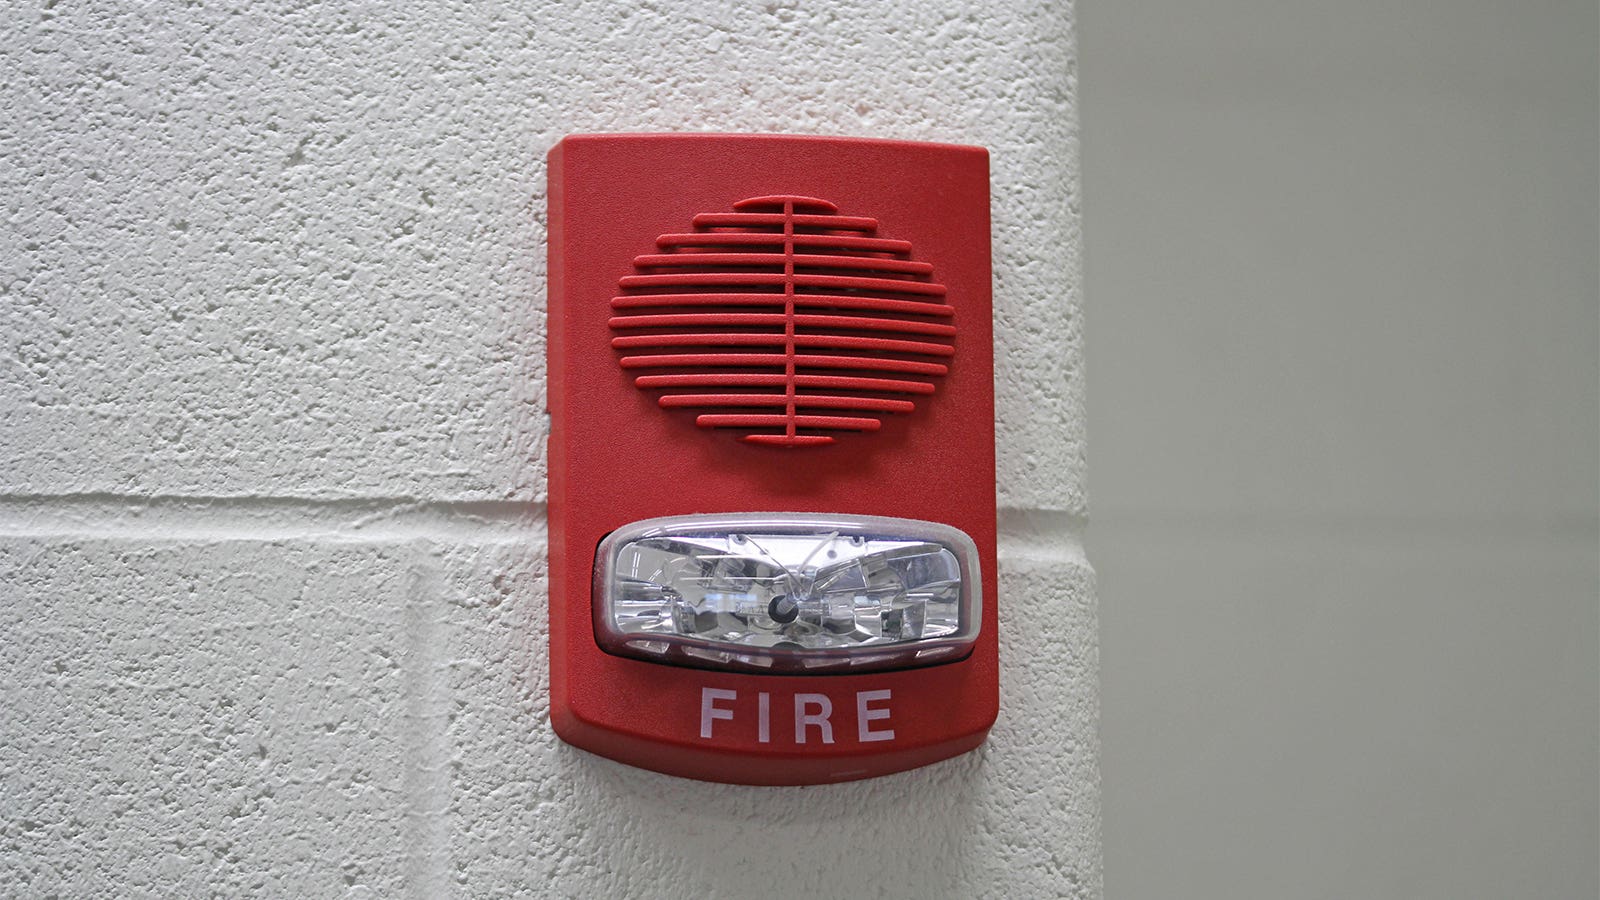 Are We Desensitized to Fireplace Alarms in the Health middle?